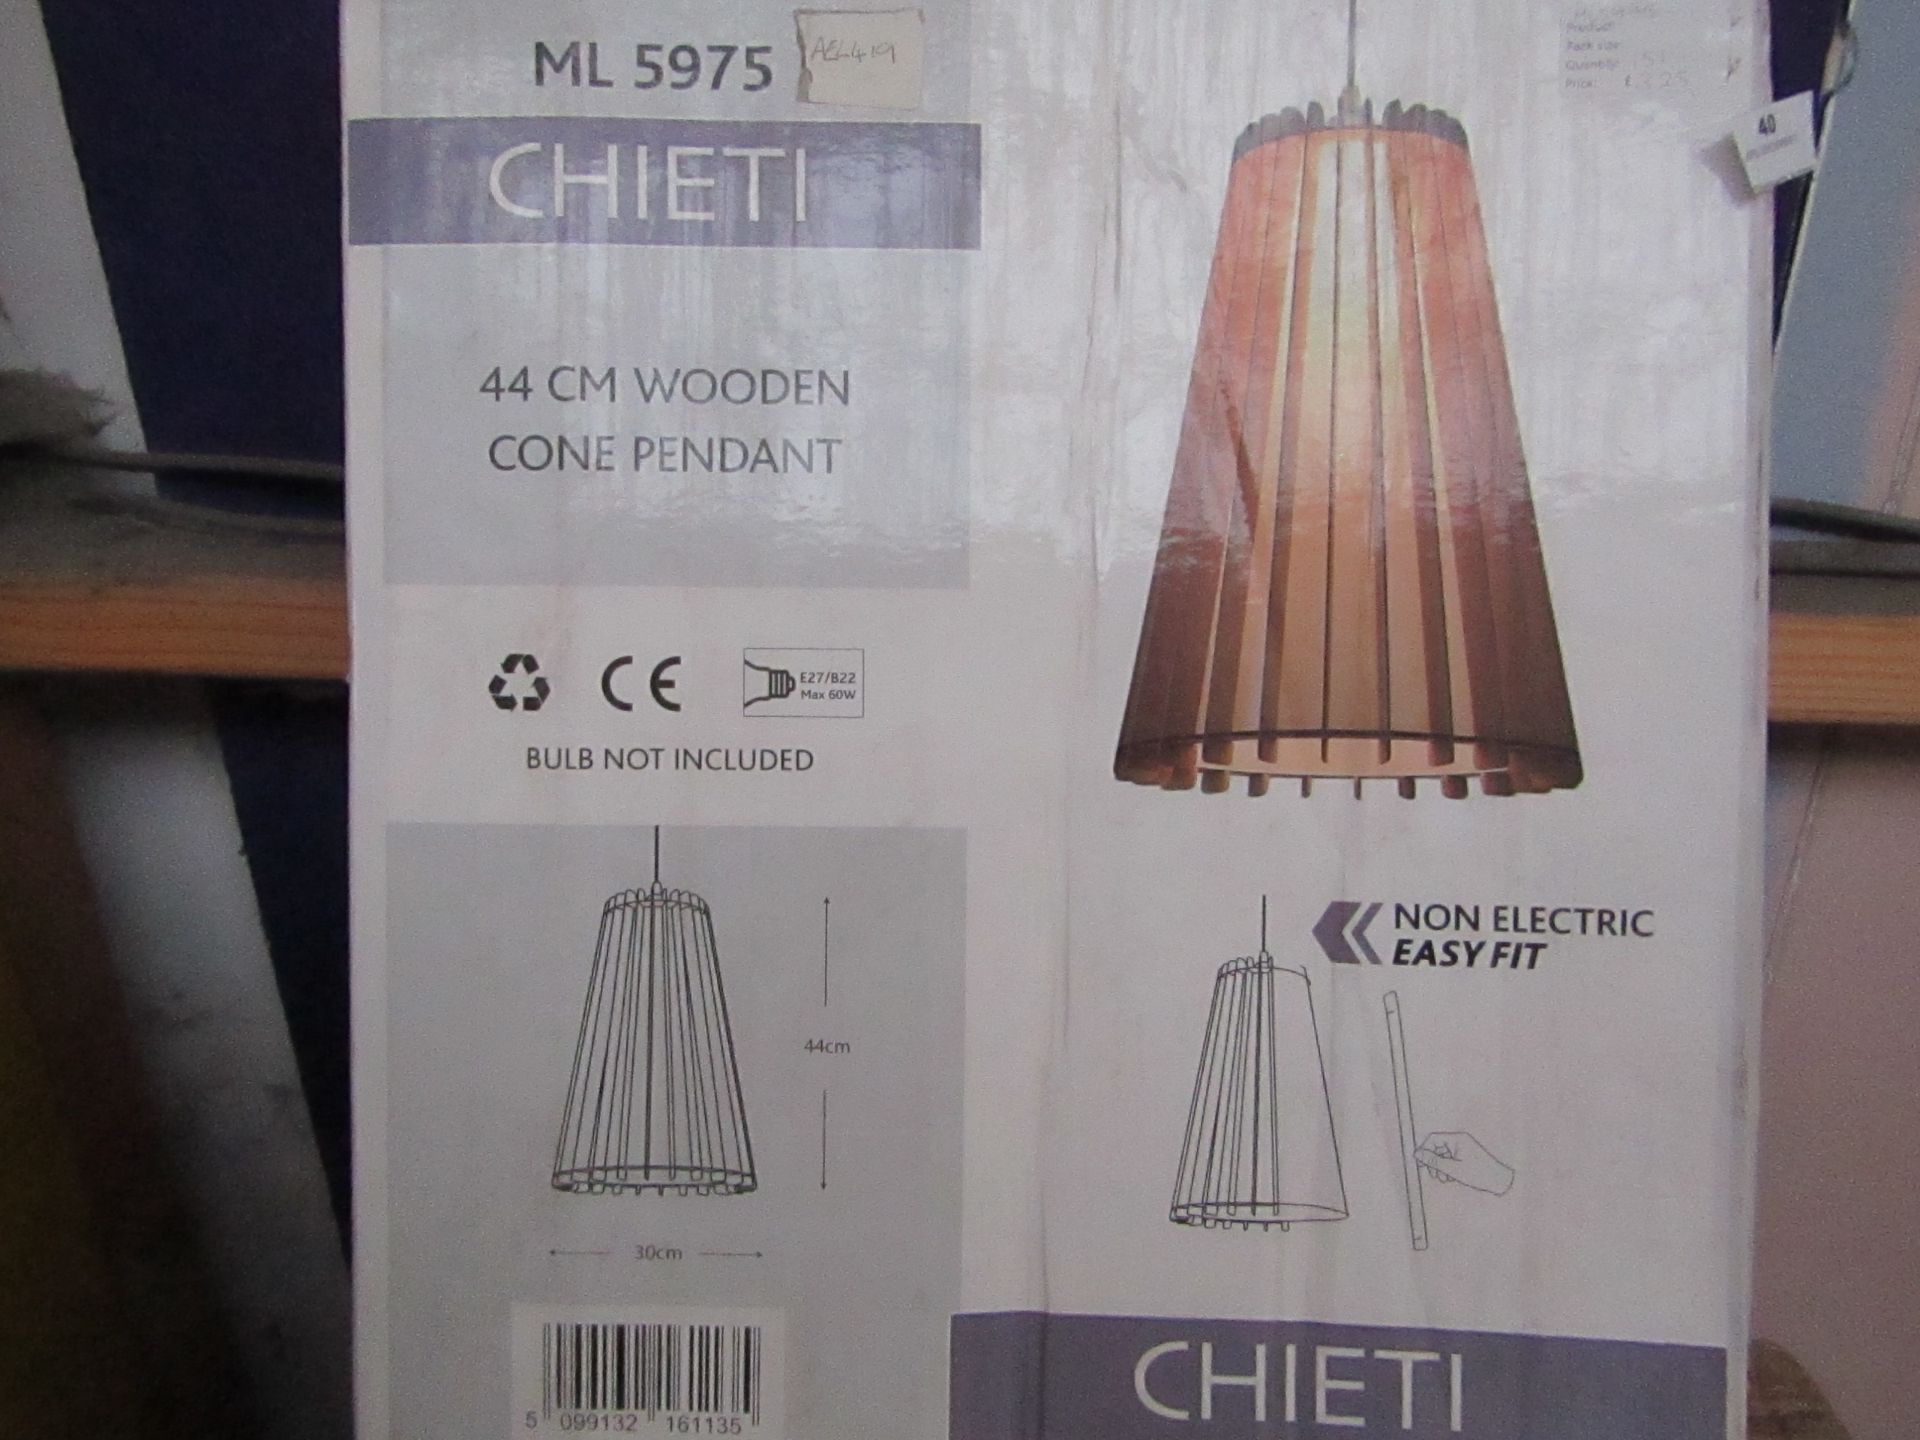 Chieti - 44cm Wooden Cone Pendent - Unchecked & Boxed.